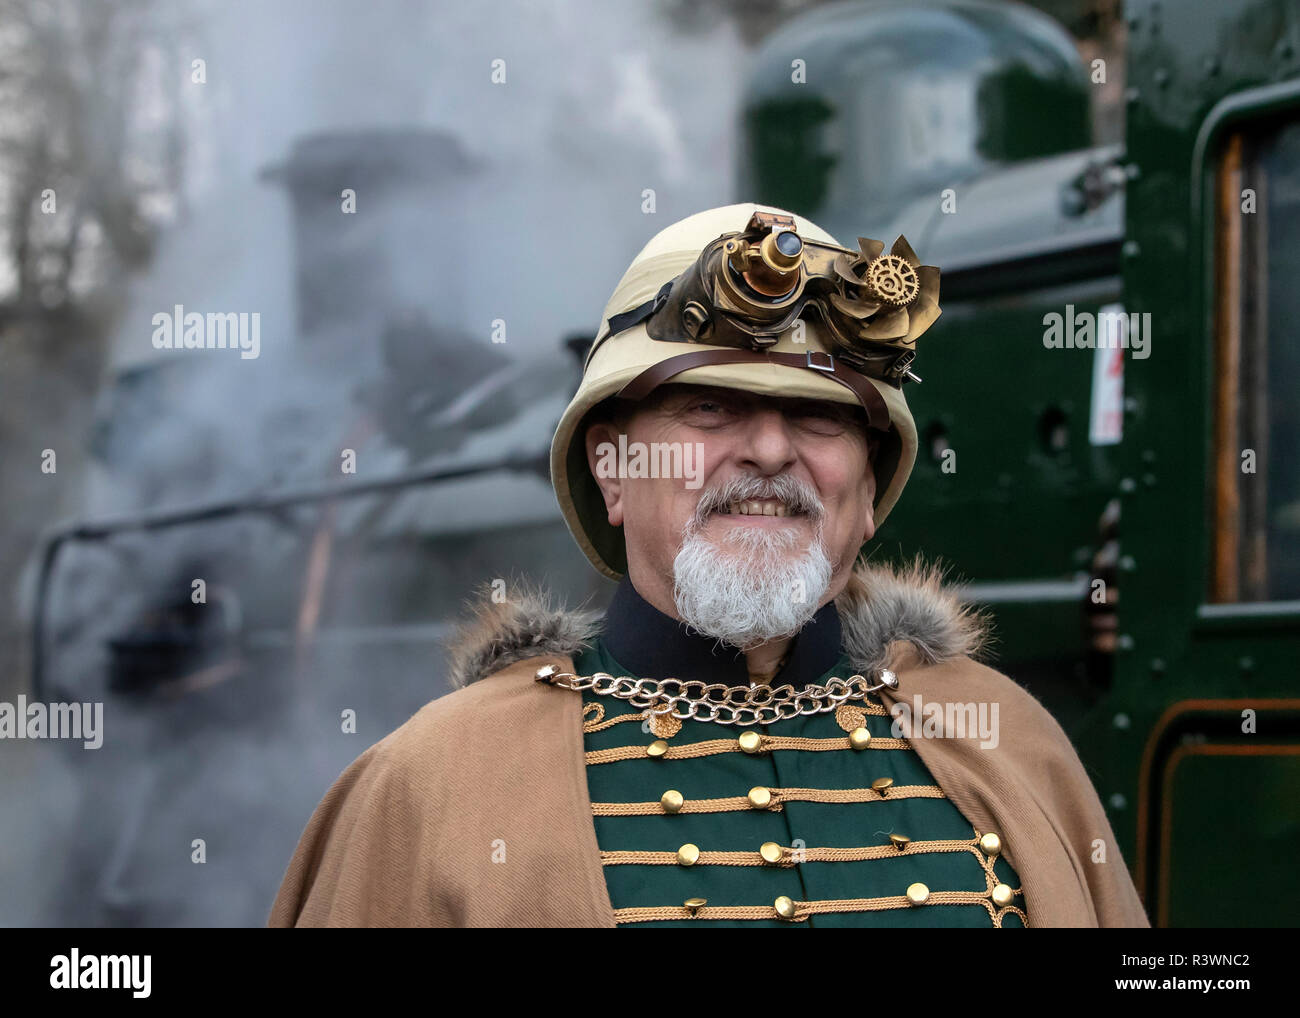 A steampunk next to a steam locomotive during the Haworth Steampunk Weekend, as hundreds of Steampunks descend on the quite village of Haworth in the Pennine hills of West Yorkshire, England. Stock Photo